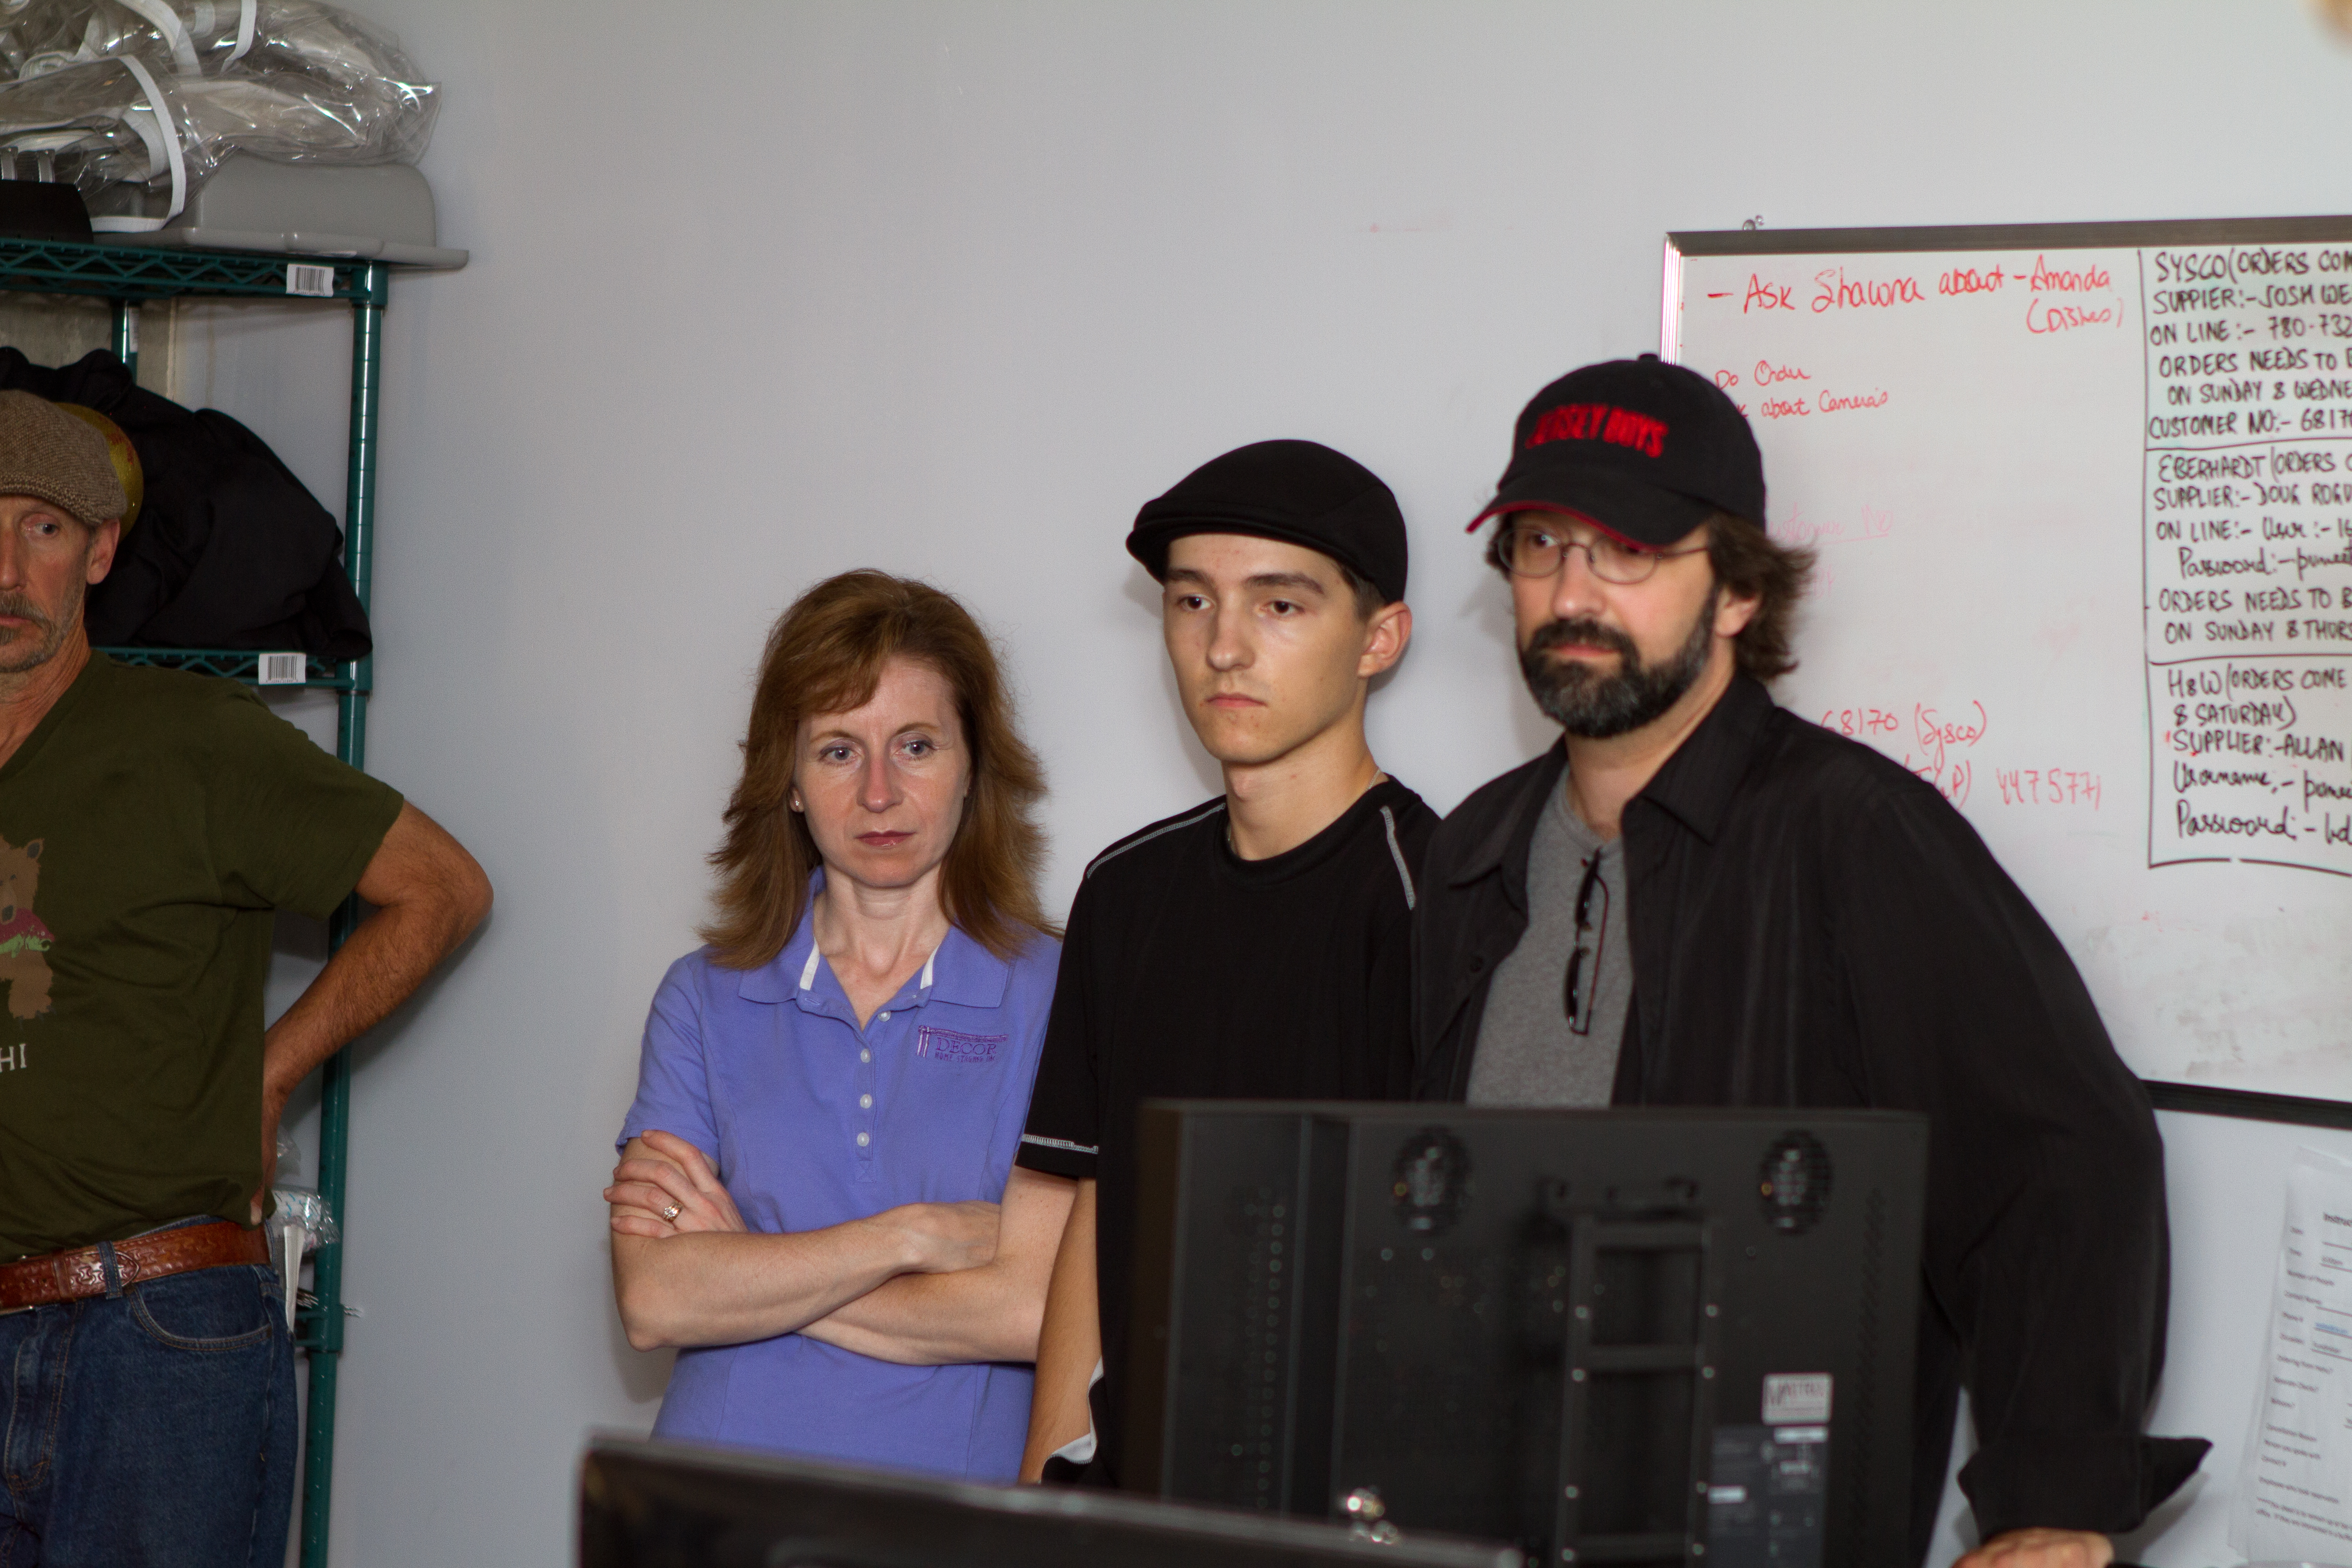 On location shooting Forbidden Playground with Director Kevin Matlo, Production Designer Kathy Matlo, DIT Joshua Matlo and 1st AD Craig Wallace